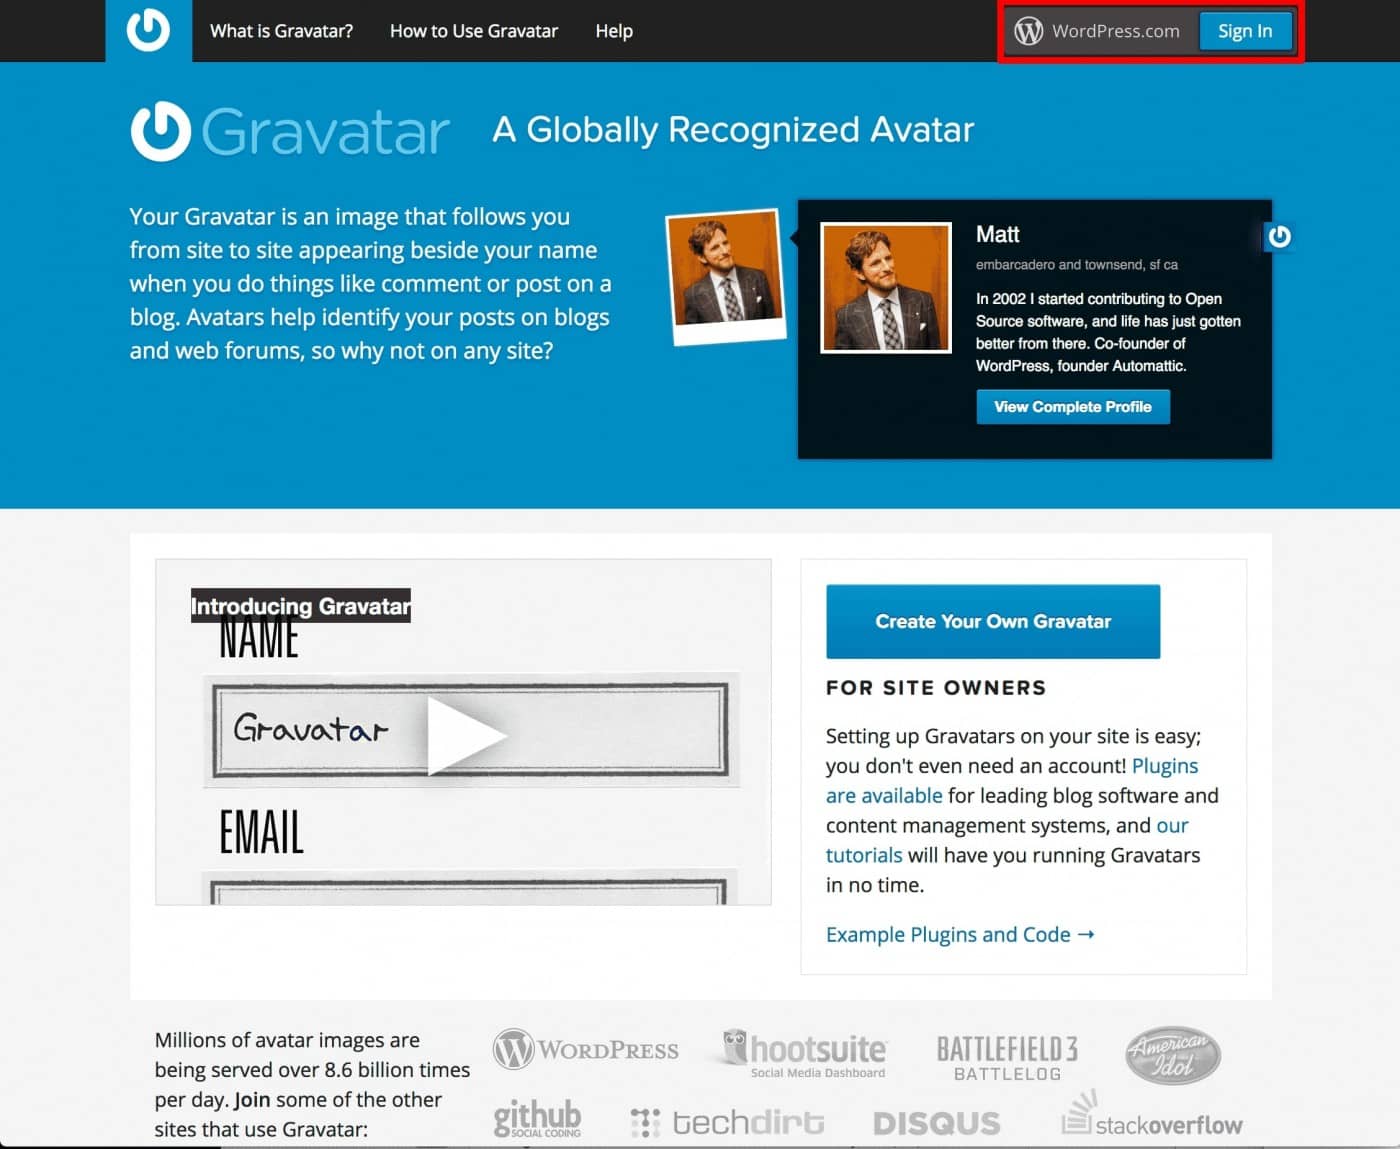 How to Create a WordPress Website - Lesson 4 - How to get your Gravatar to show up in WordPress